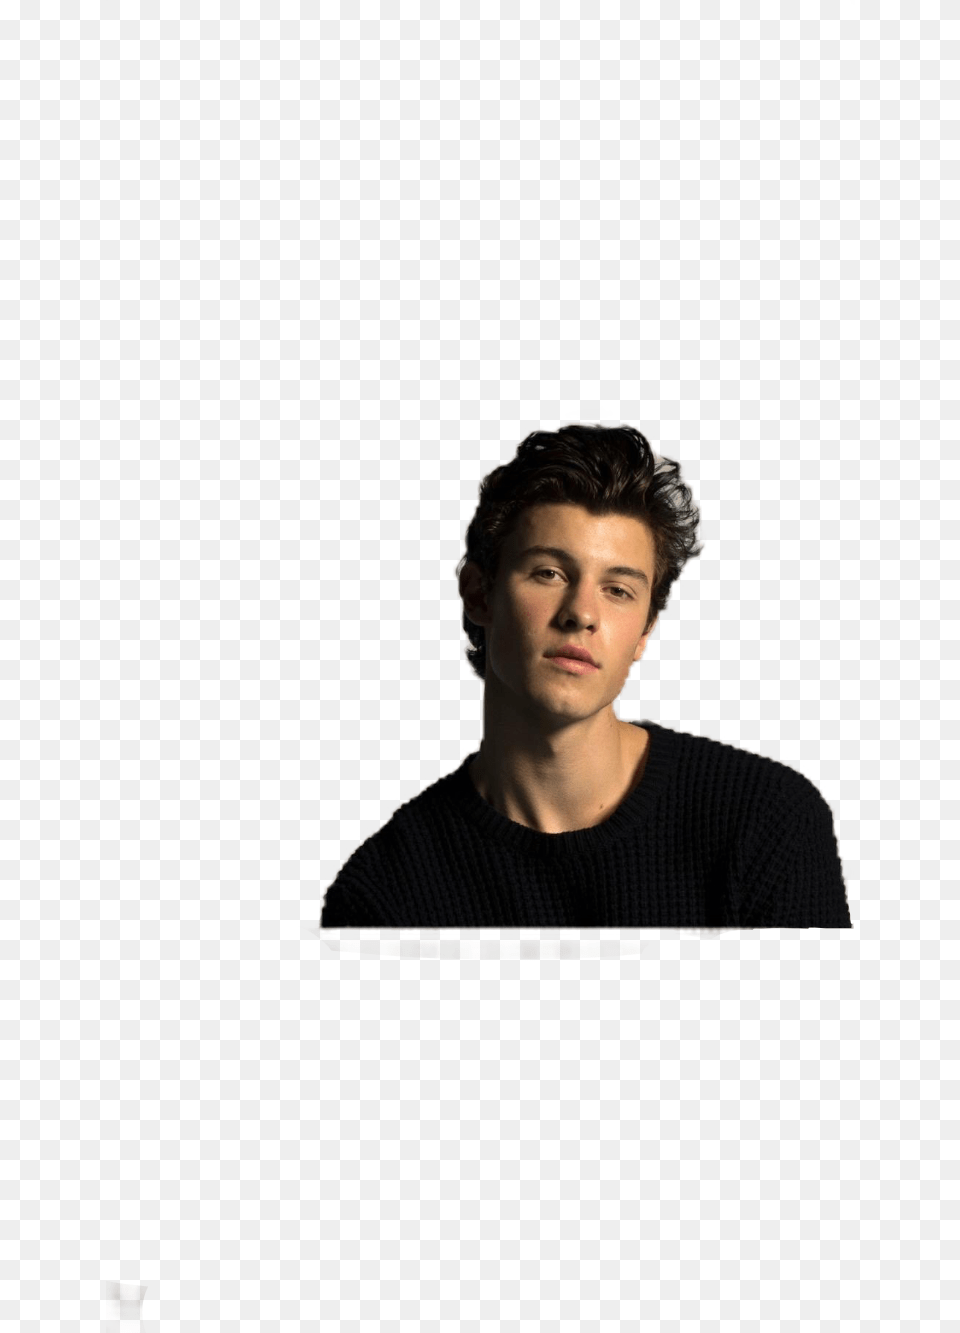 Shawnmendes Mendesarmy Shawn Mendes Inmyblood Shawn Mendes, Smile, Portrait, Photography, Face Png